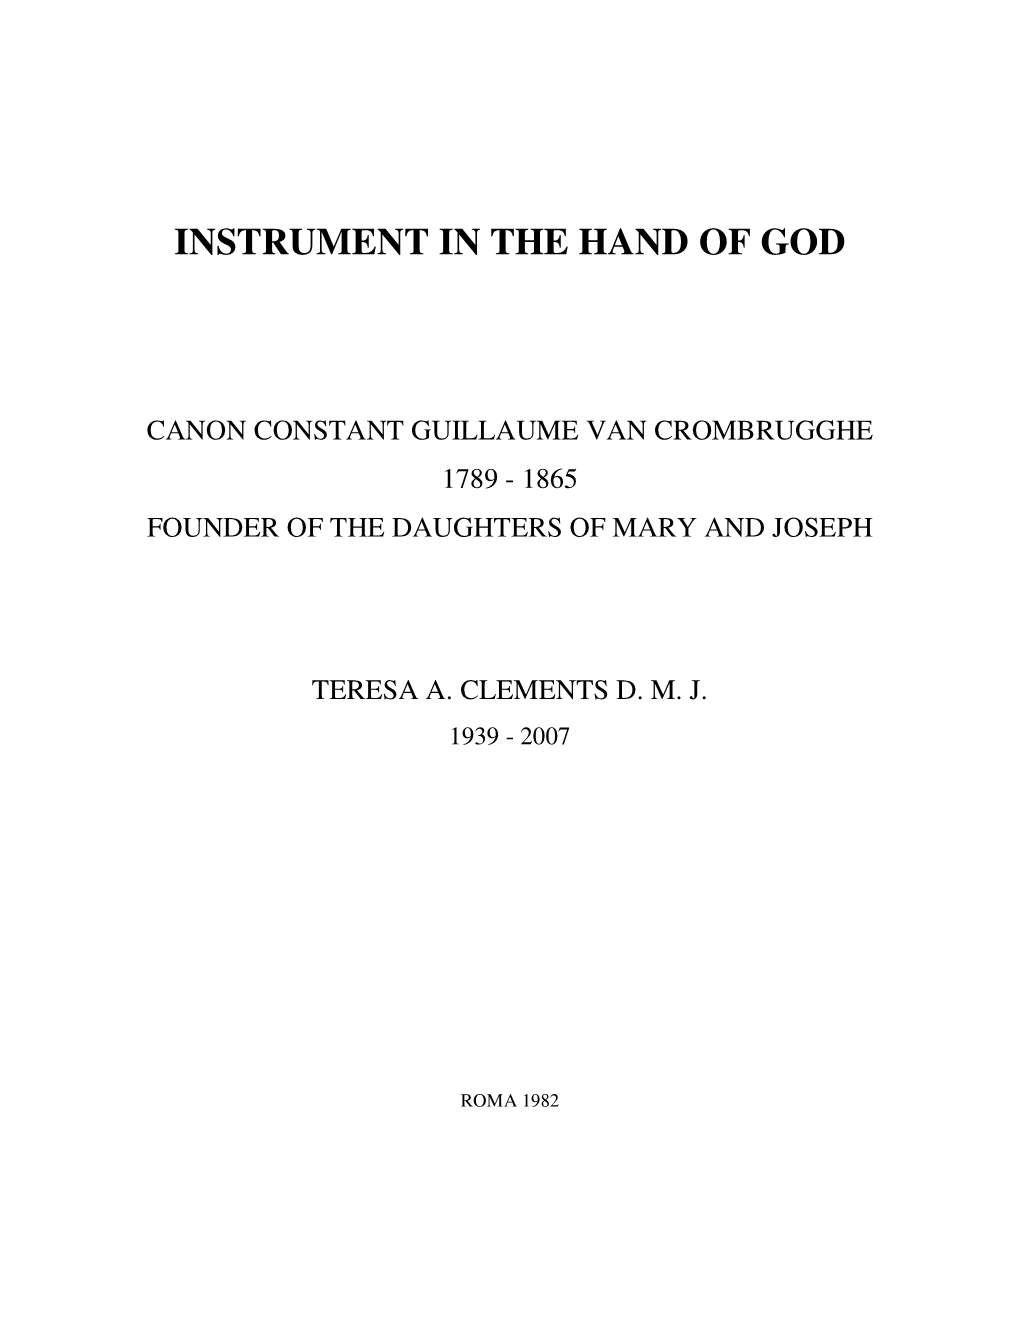 Instrument in the Hand of God